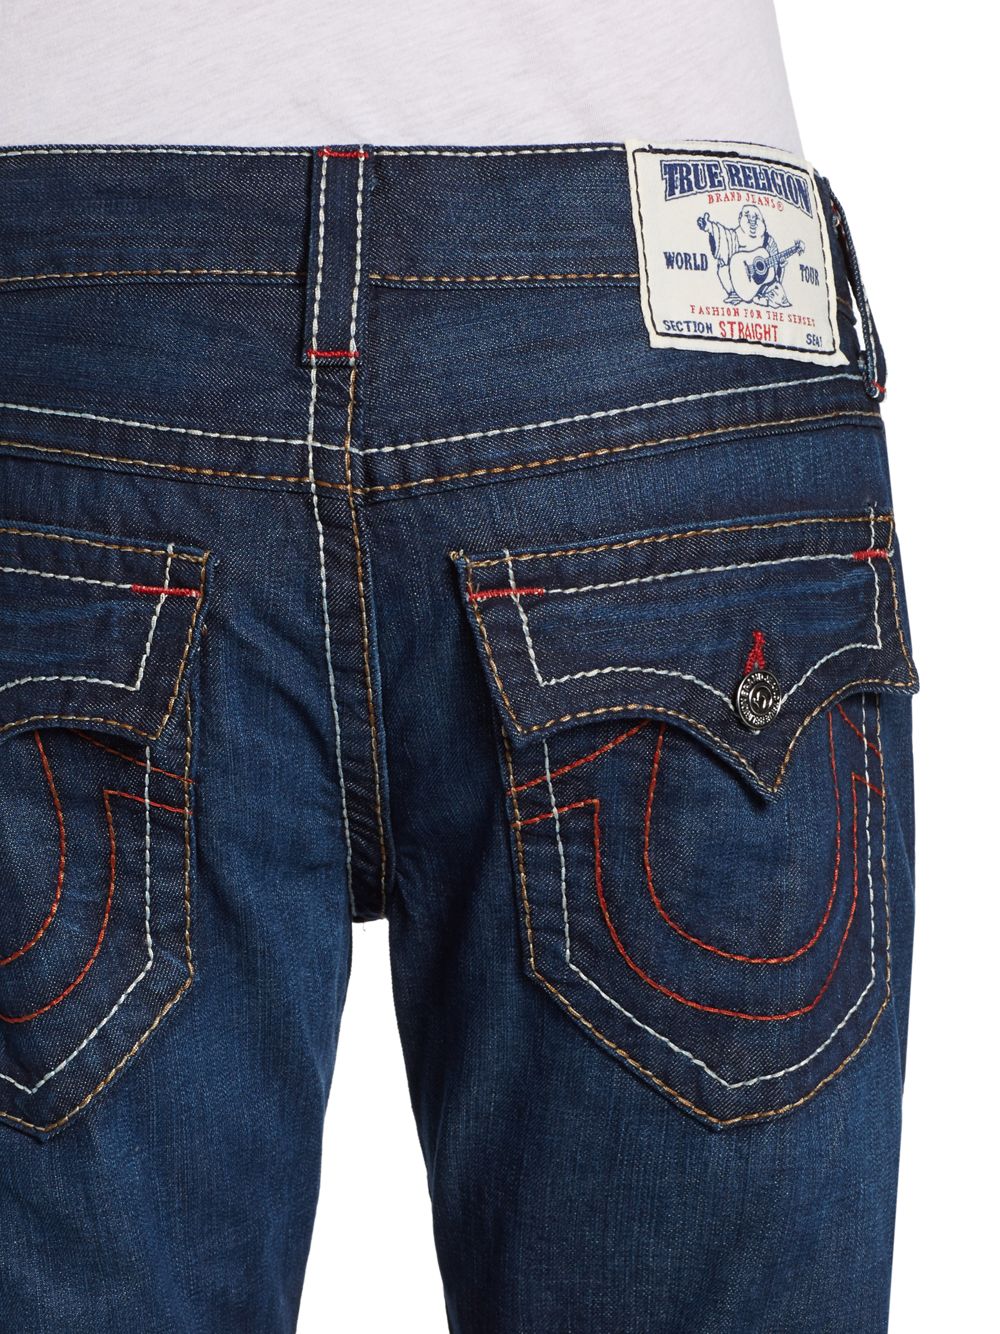 Lyst - True Religion Contrast Stitched Straightleg Jeans in Blue for Men